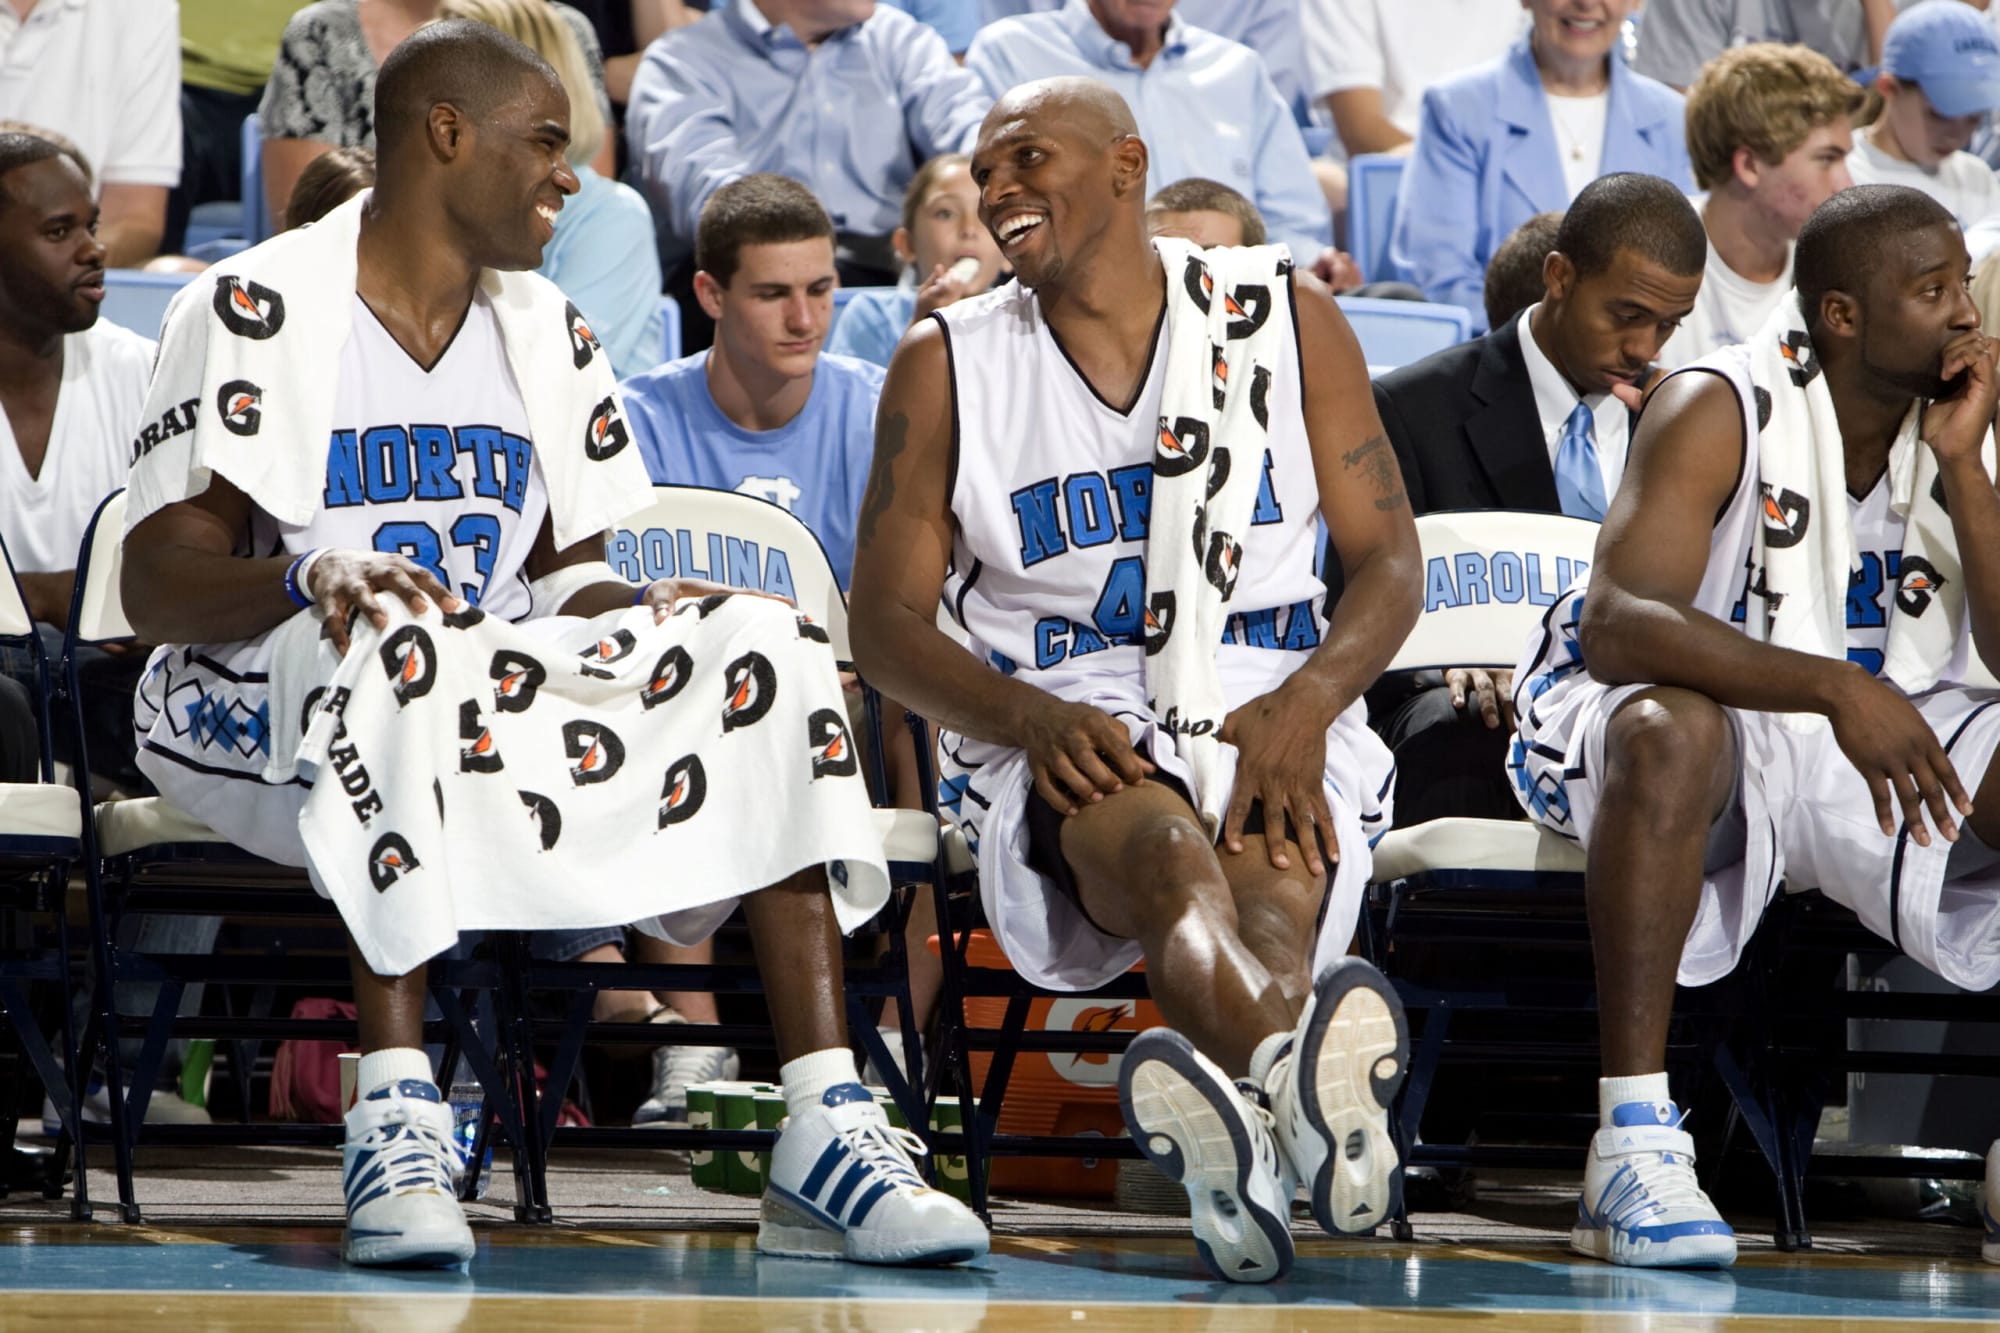 UNC Basketball Alum inducted into NC Sports Hall of Fame